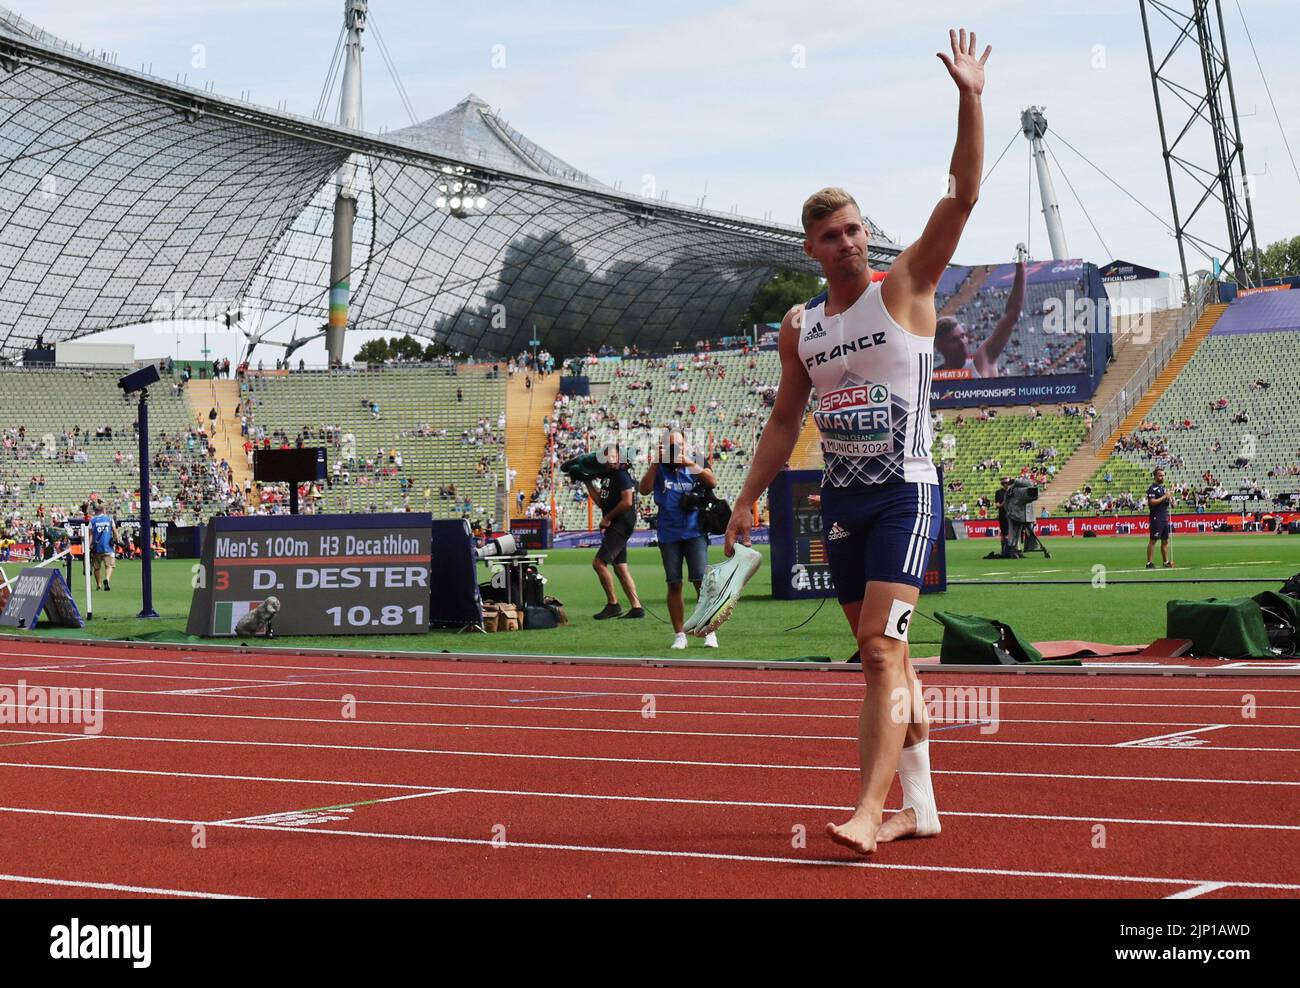 Athletics - 2022 European Championships - Olympiastadion, Munich, Germany - August 15, 2022 France's Kevin Mayer acknowledges spectators after sustaining an injury during the Men's Decathlon 100m - Heats REUTERS/Wolfgang Rattay Stock Photo